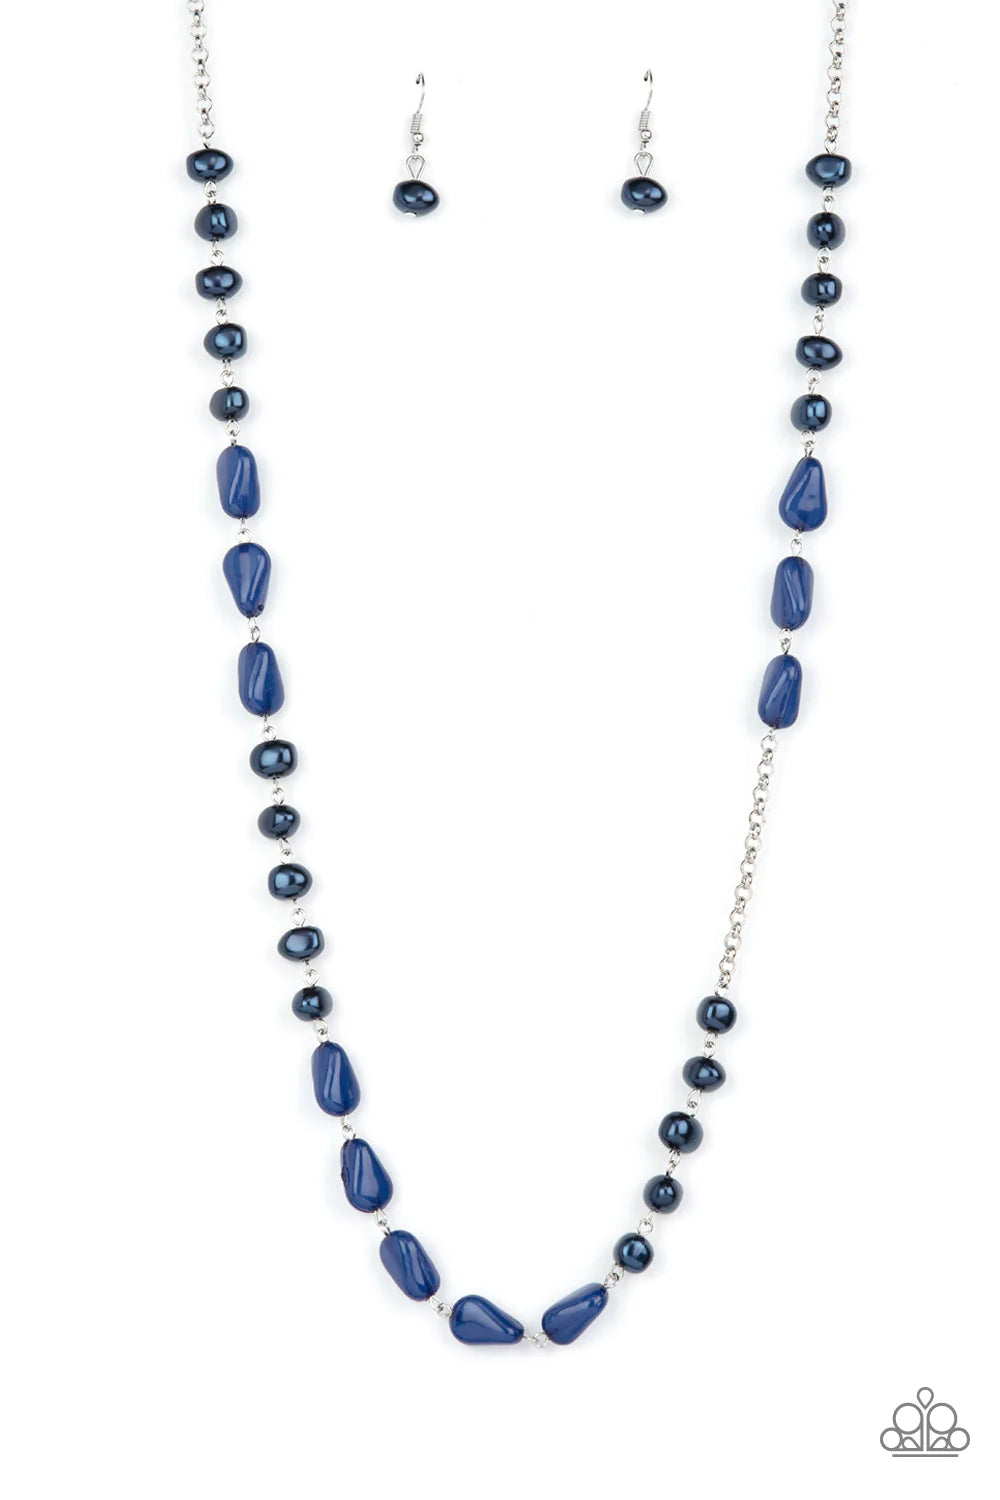 Paparazzi Accessories Shoreline Shimmer - Blue Enchanting sections of asymmetrical blue pearls and glassy blue teardrop beads alternate along an elegantly extended silver chain, creating a refined pop of color across the chest. Features an adjustable clas